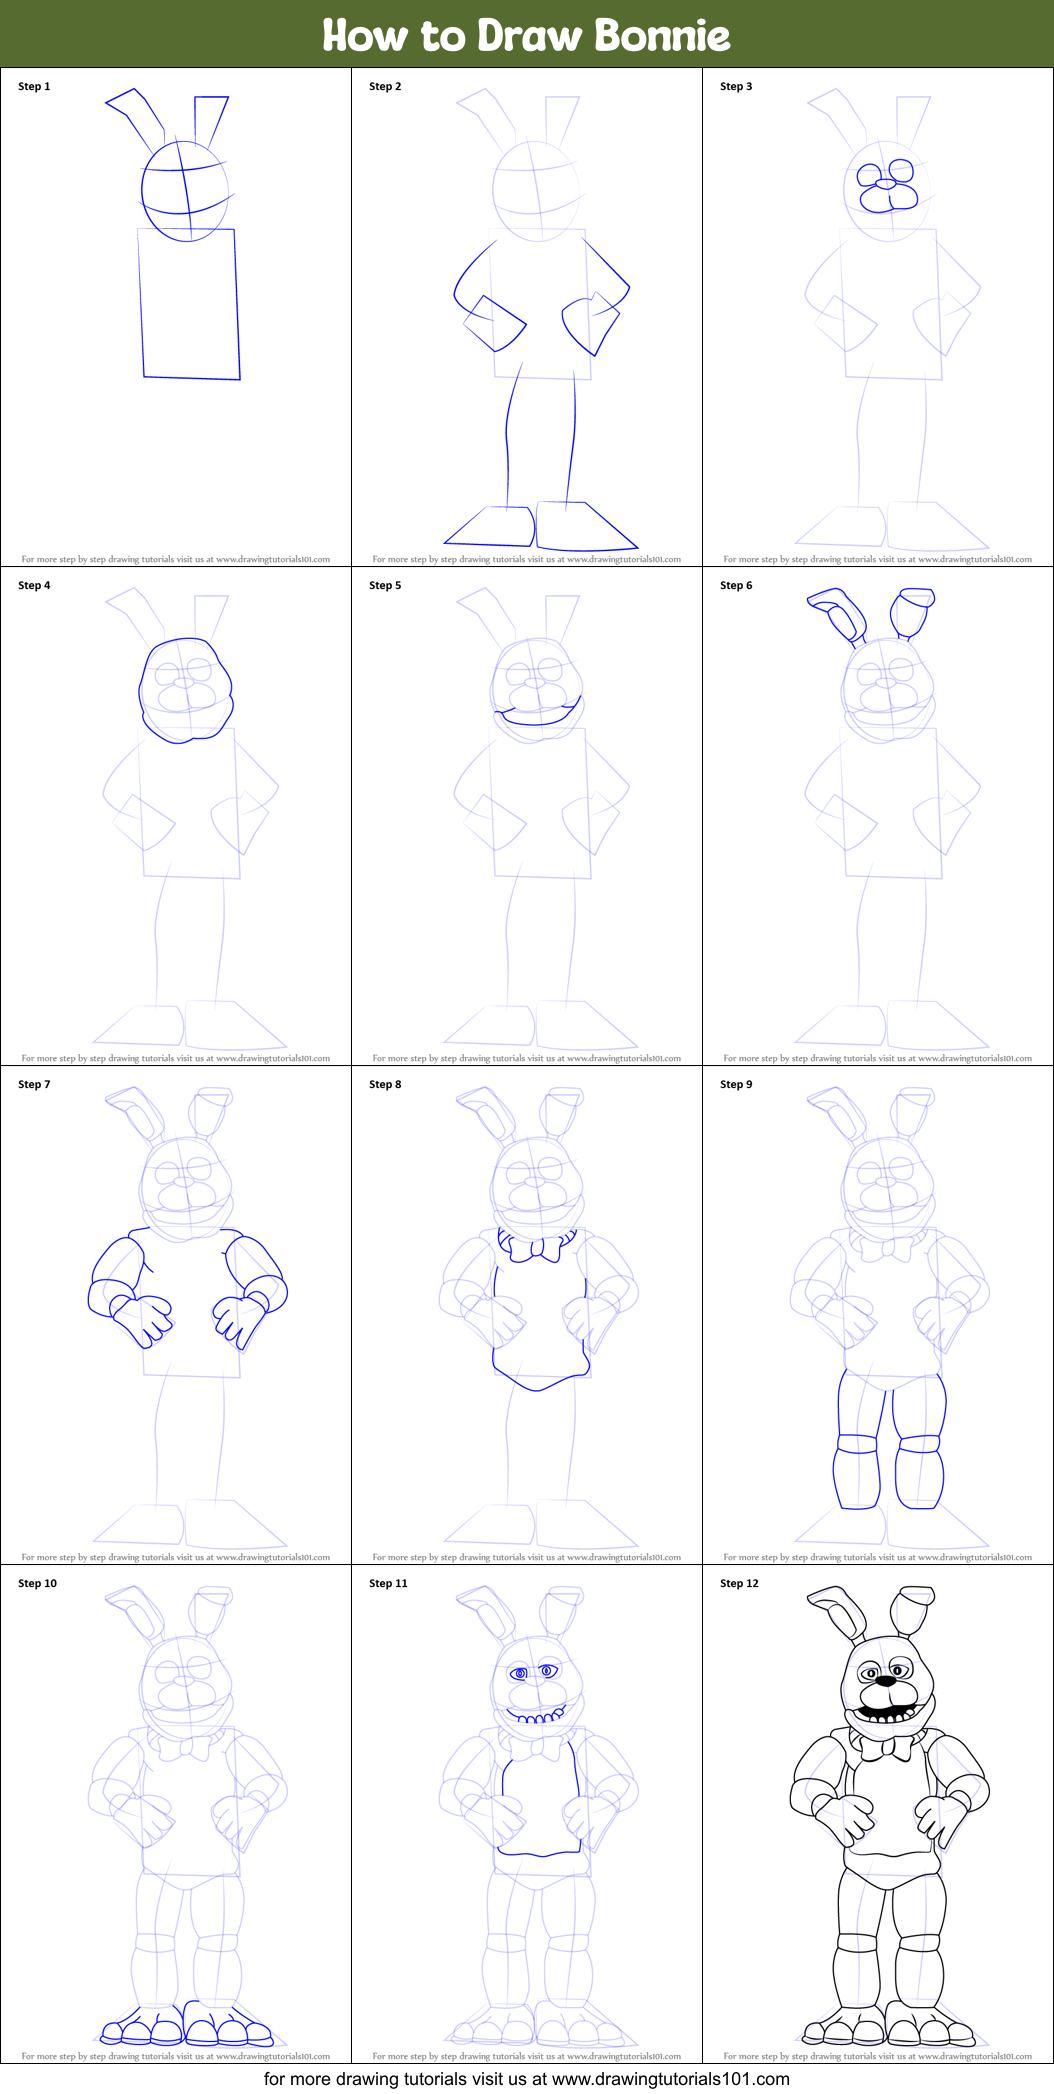 How to Draw Bonnie printable step by step drawing sheet